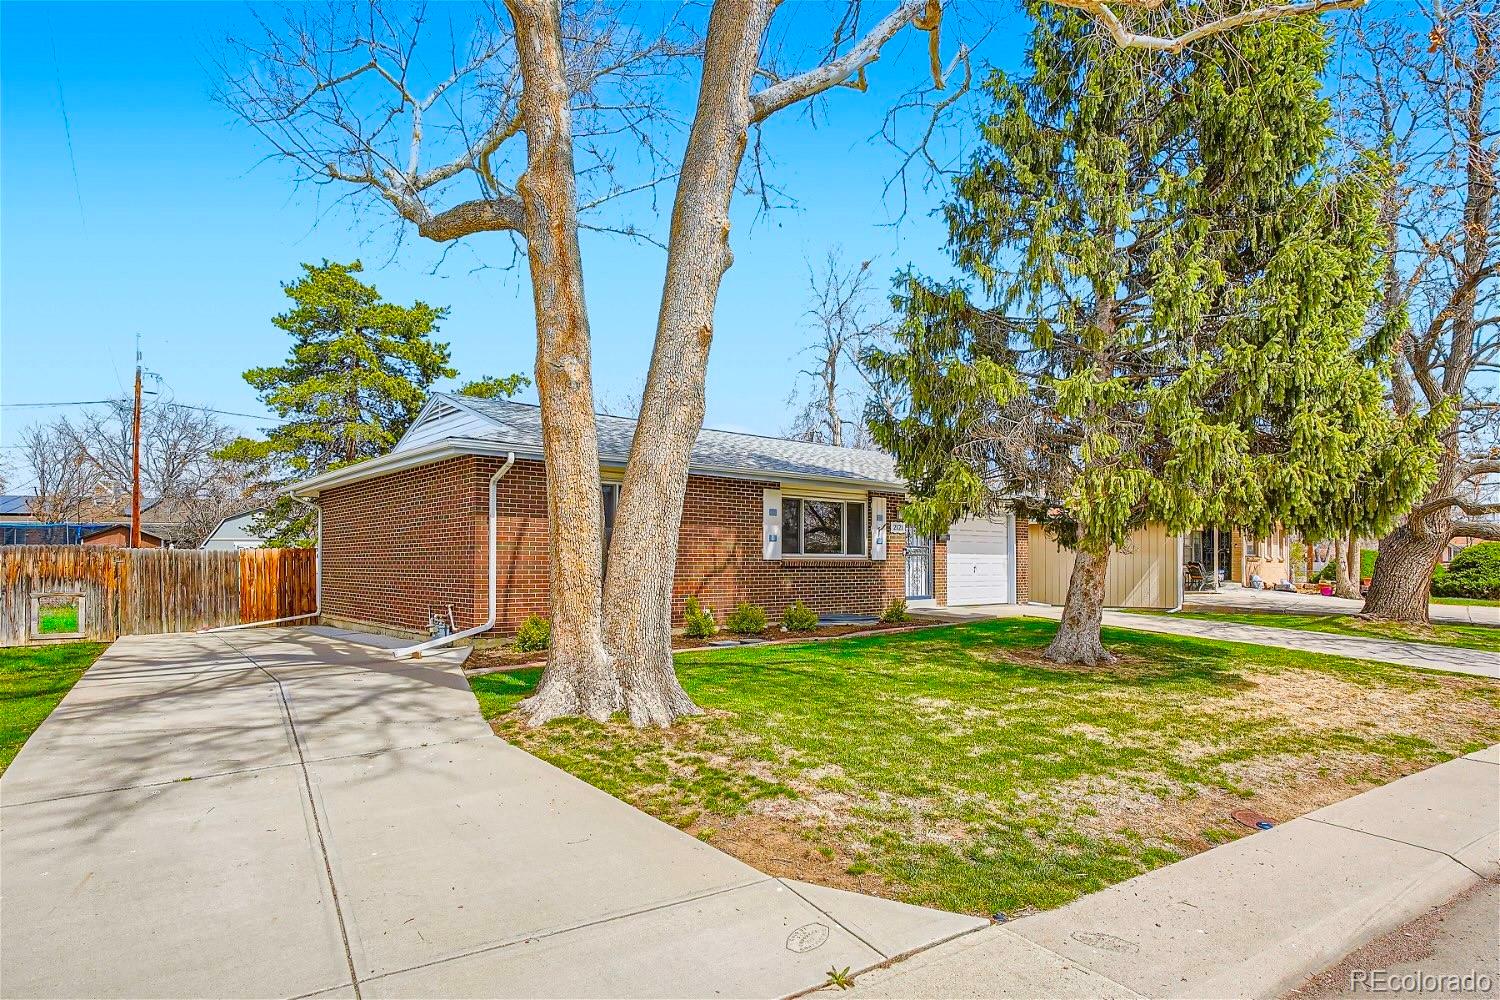 Report Image for 2121  Valley View Drive,Denver, Colorado